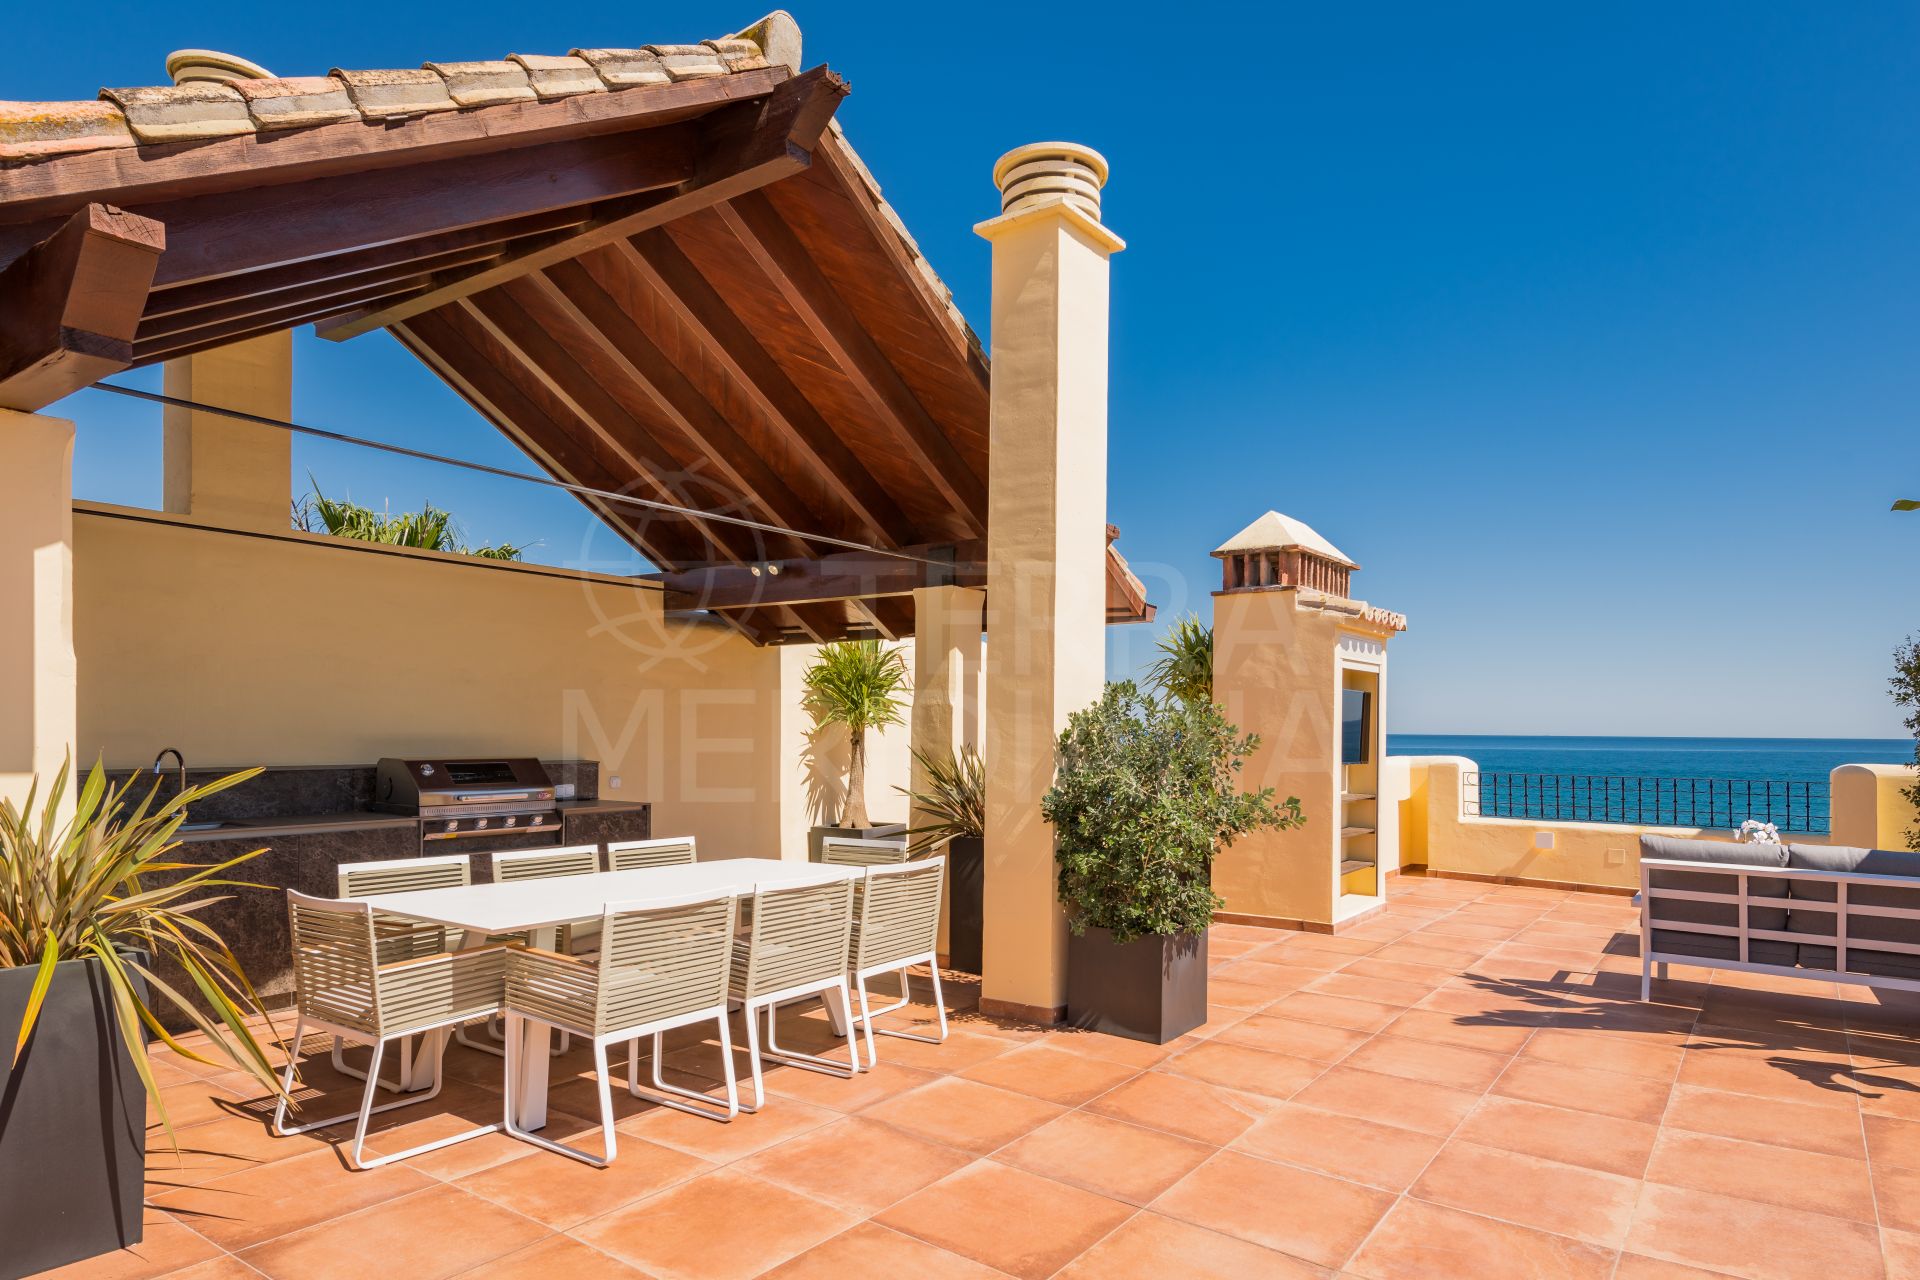 Renovated, frontline beach penthouse, 3 bedrooms, terraces, solarium, gated community, for sale in Estepona